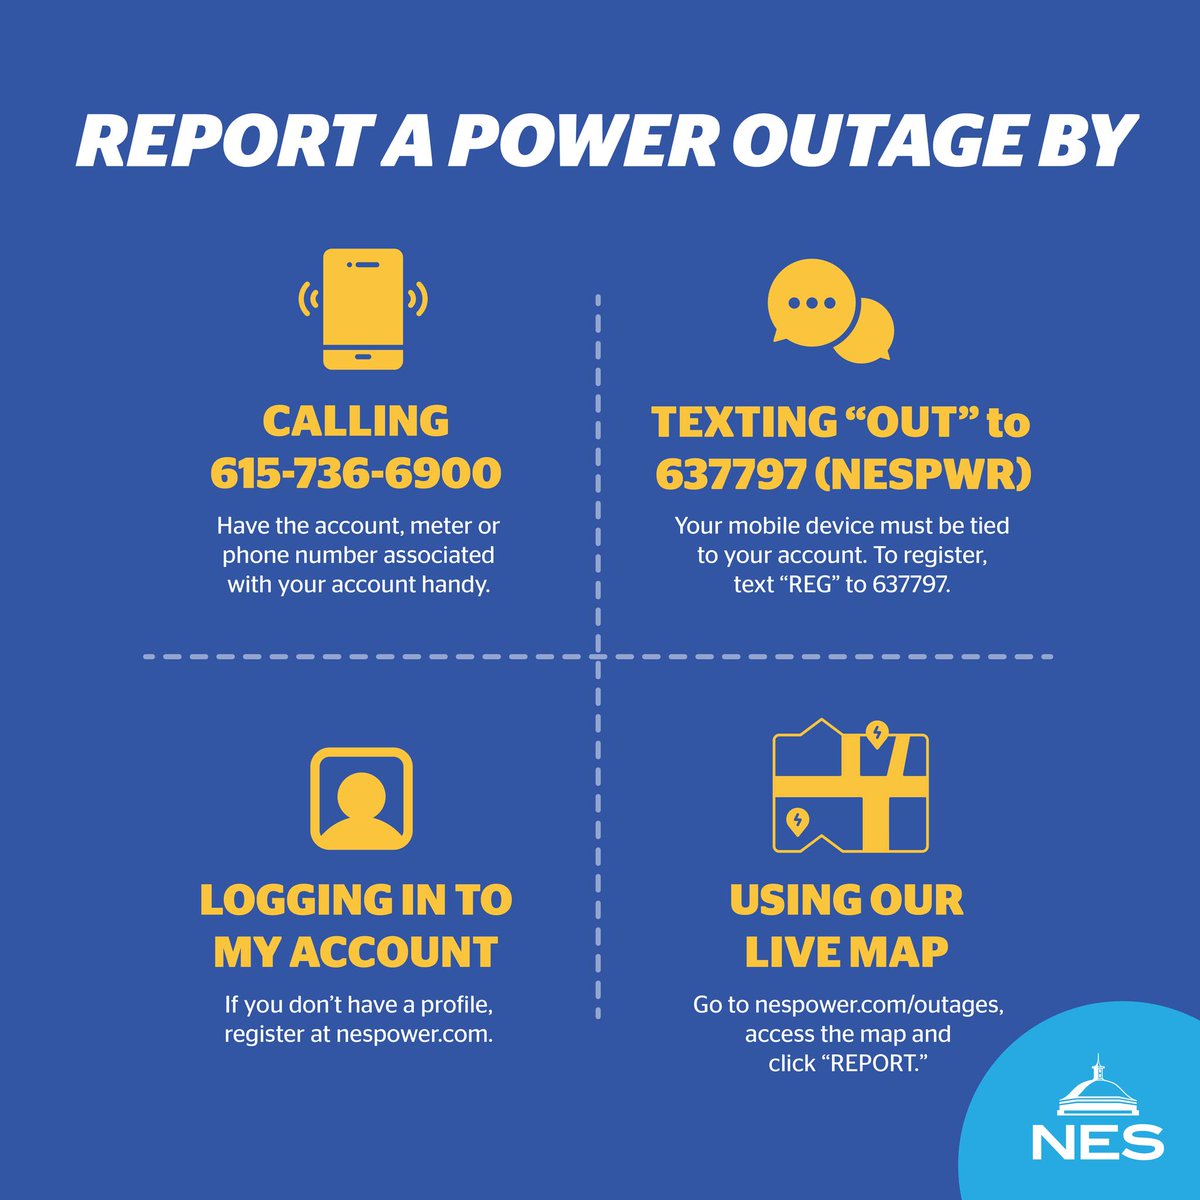 Customer outages are rolling in as the first phase of this storm system passes through. We have just over 6,000 customers without power at this time. That number is expected to increase. Should you lose power, be sure to report it right away. The NES storm response team is taking…